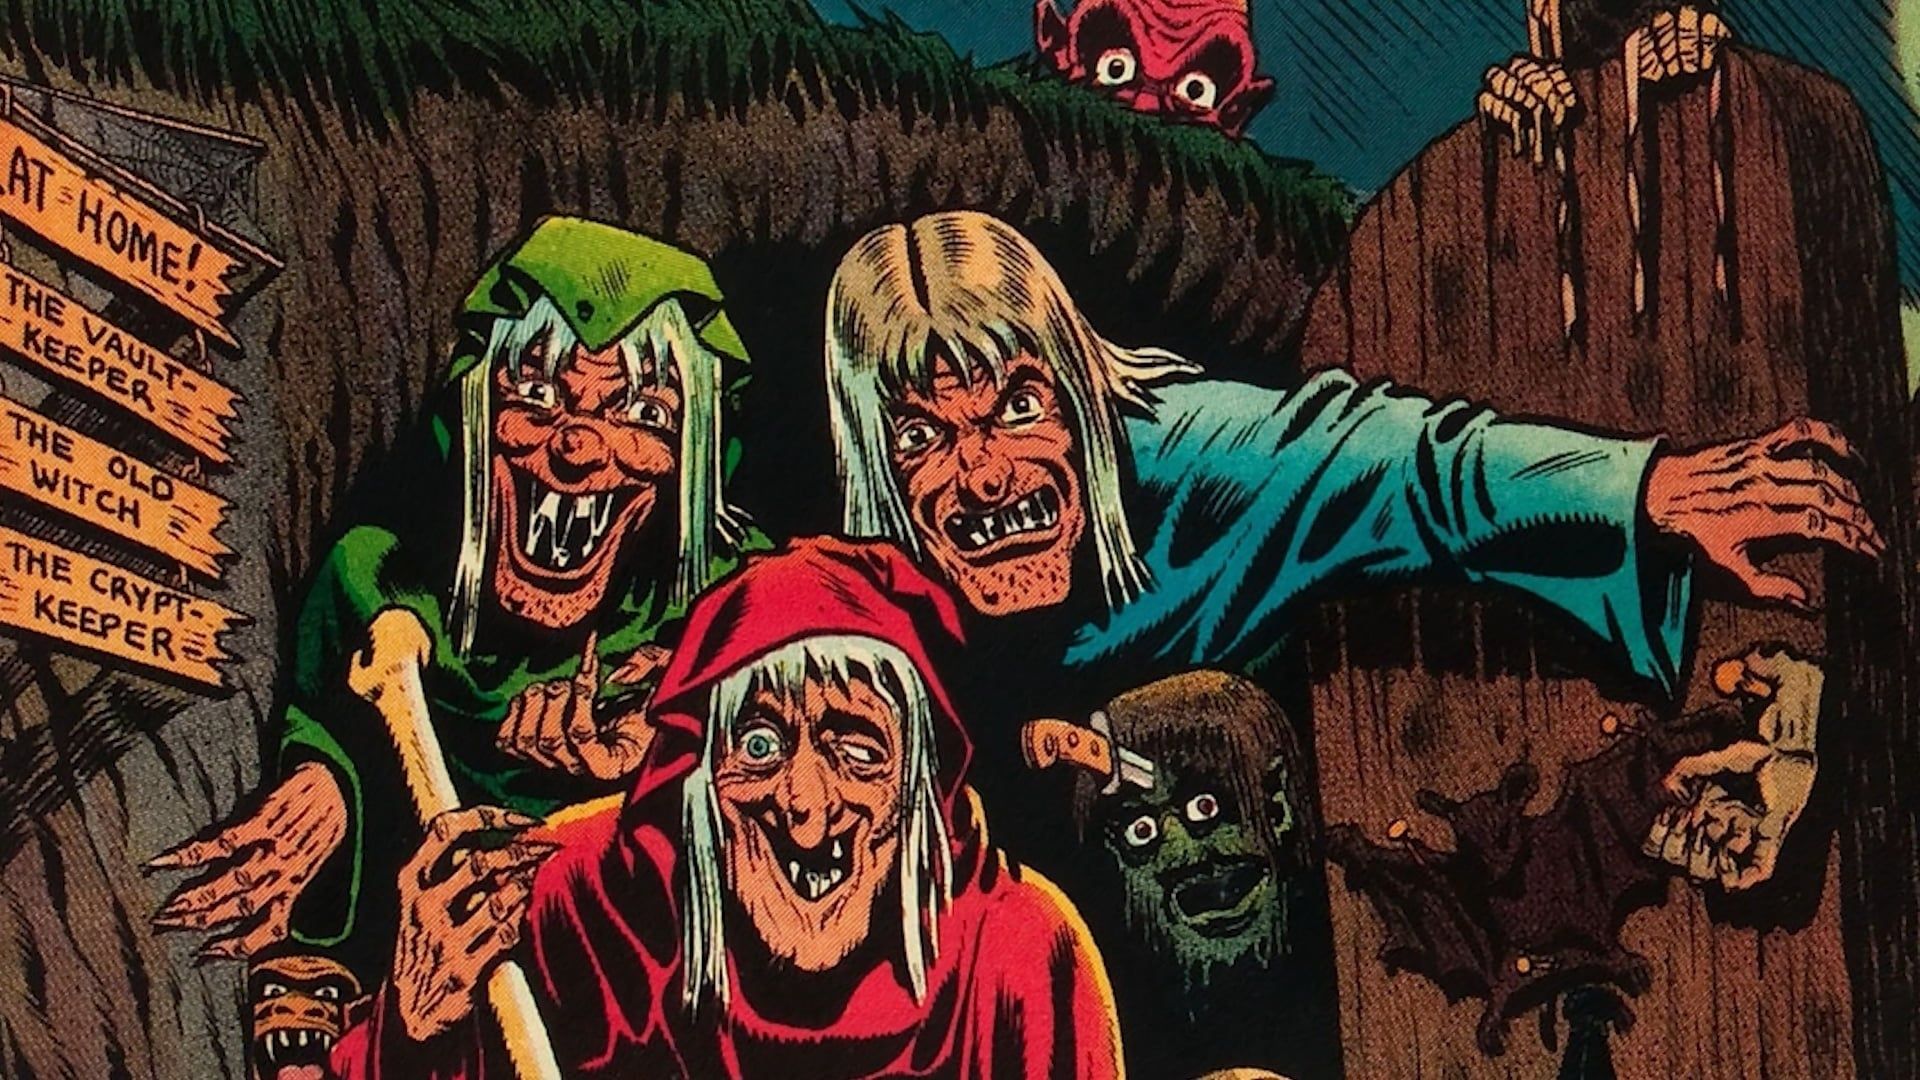 Just Desserts: The Making of 'Creepshow' background